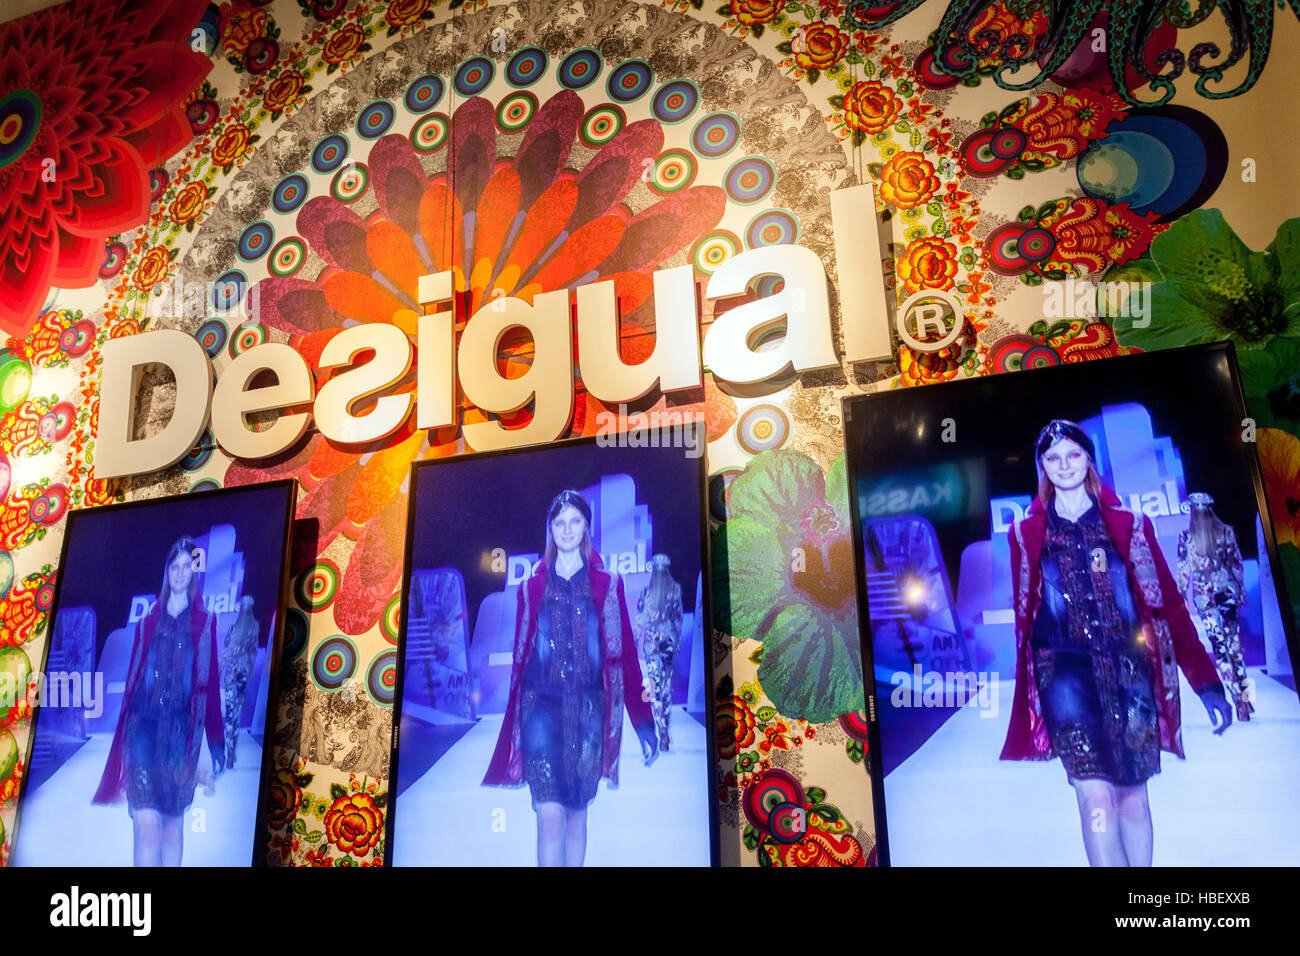 Desigual collection fashion shop, Berlin luxury store sign Stock Photo